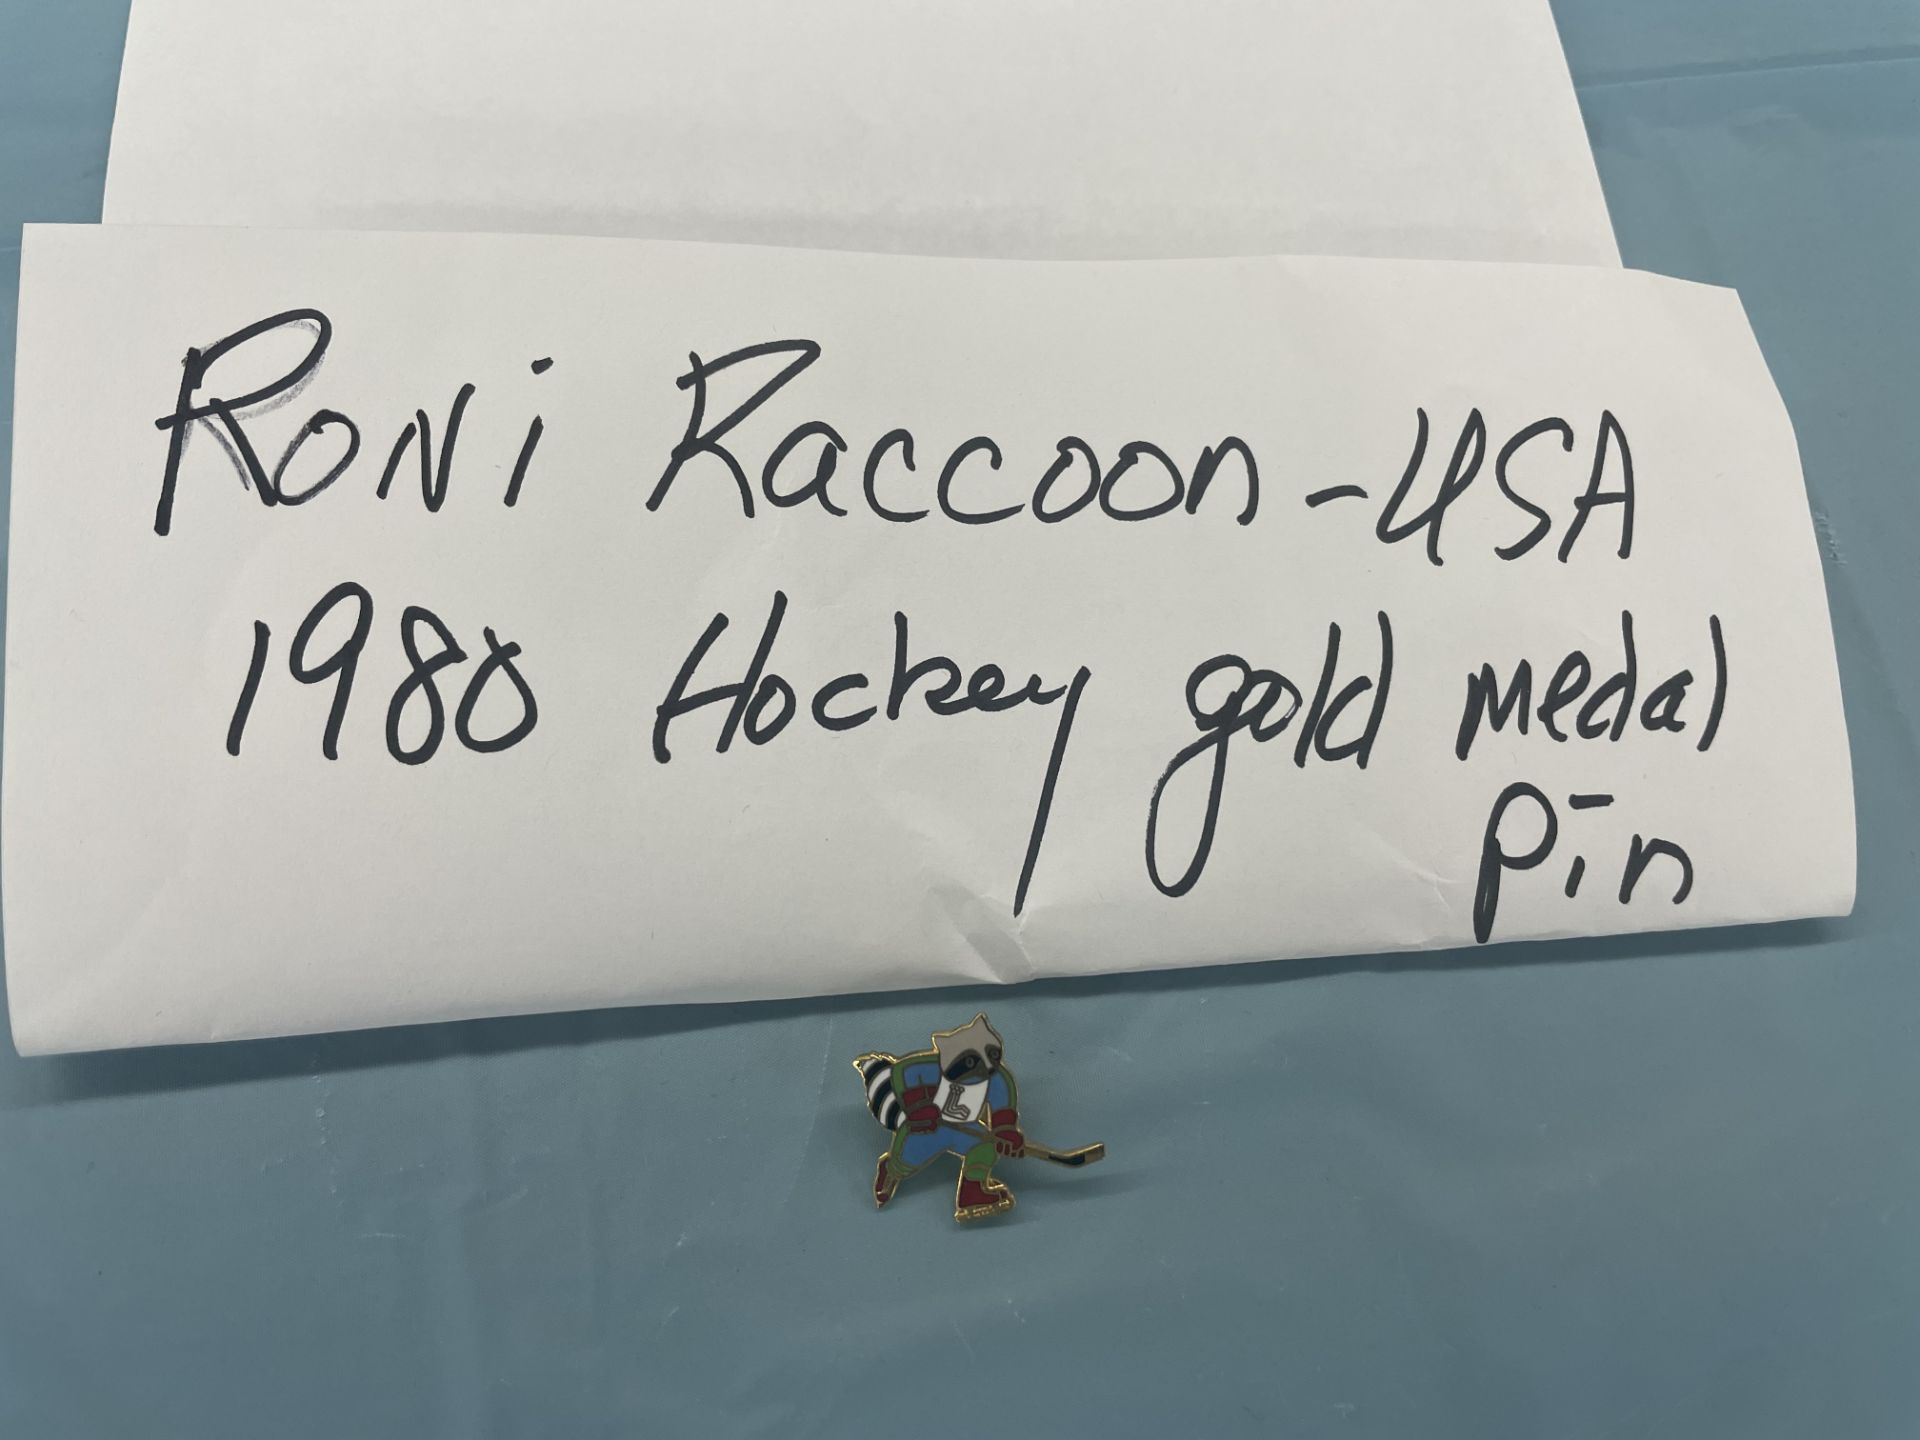 (Lot) Roni Racoon USA 1980 Hockey Gold Medal Pin - Image 3 of 3